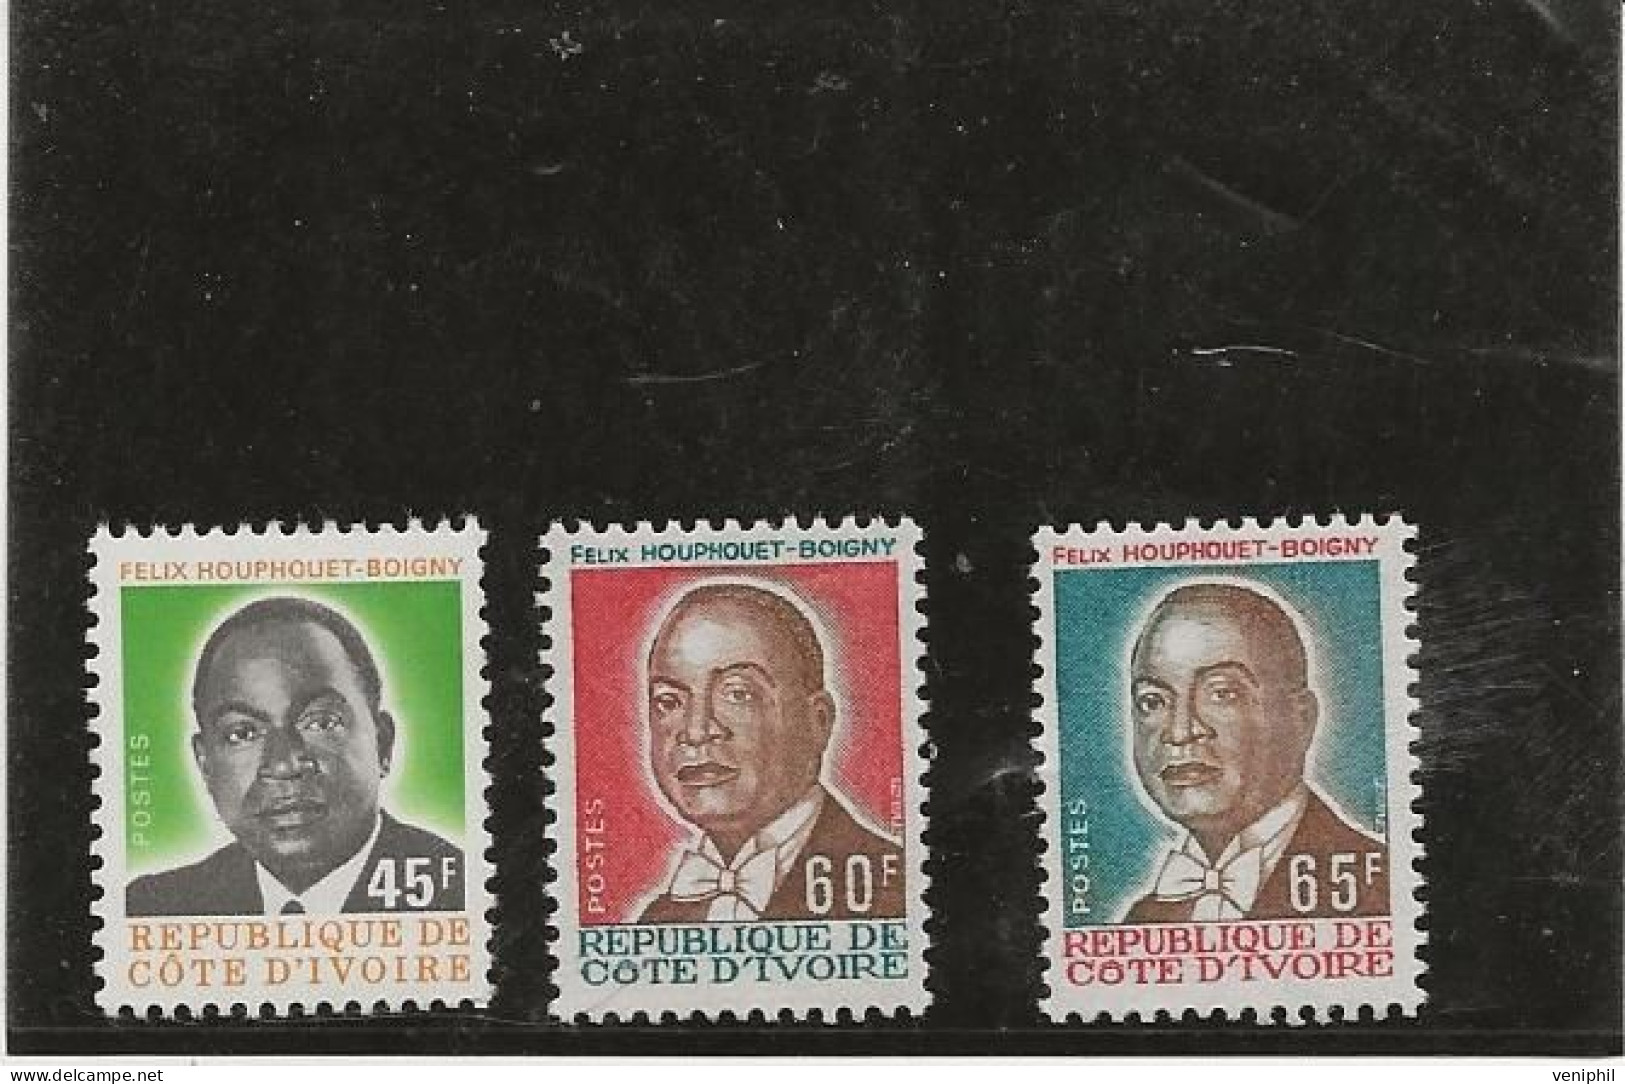 COTE D'IVOIRE - N°431 A 4233 NEUF INFIME CHARNIERE -  ANNEE 1975 - Ivory Coast (1960-...)